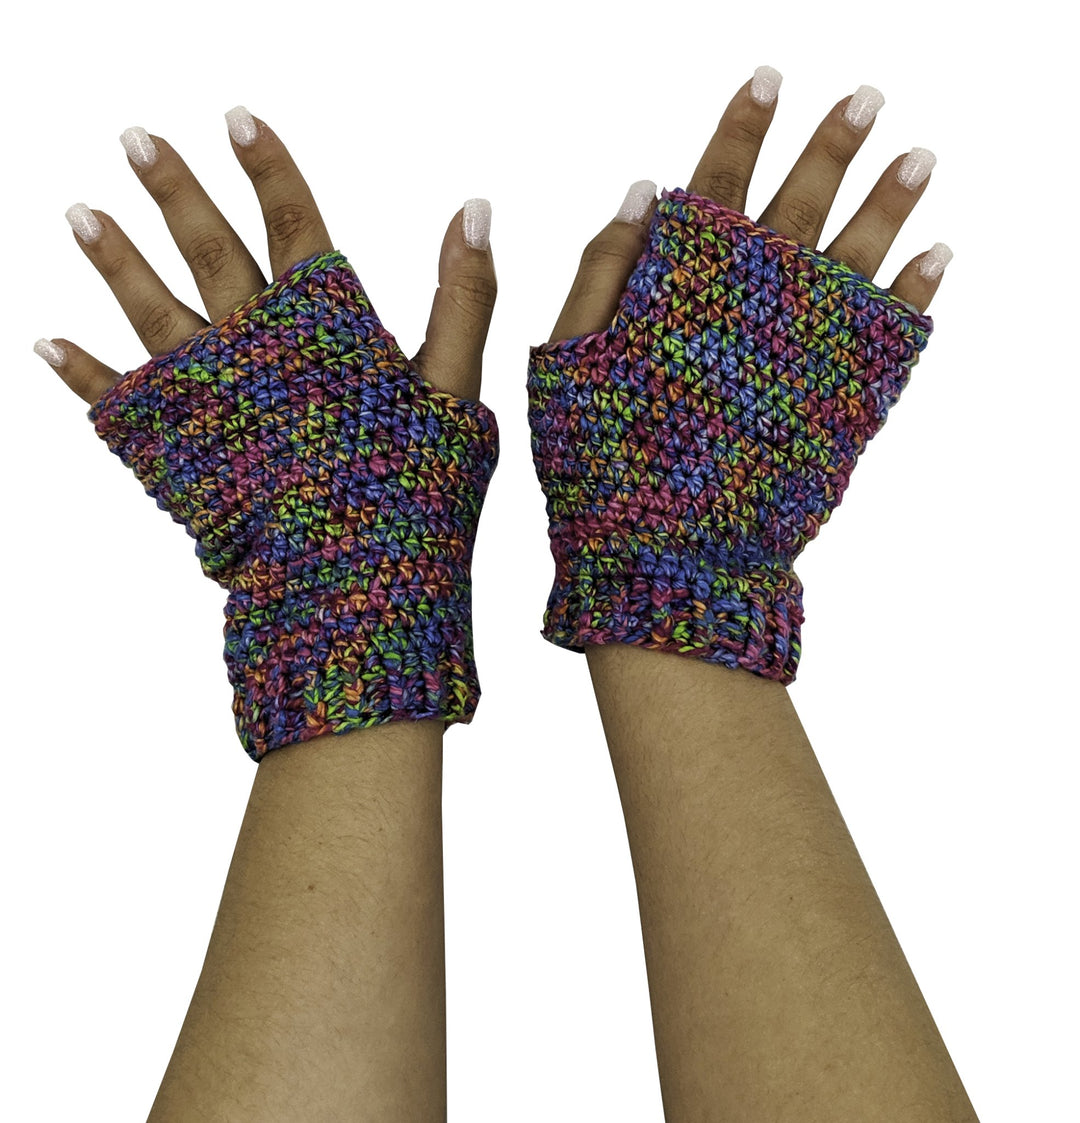 Wrists and Finger care for you crafters out there! - Darn Good Yarn